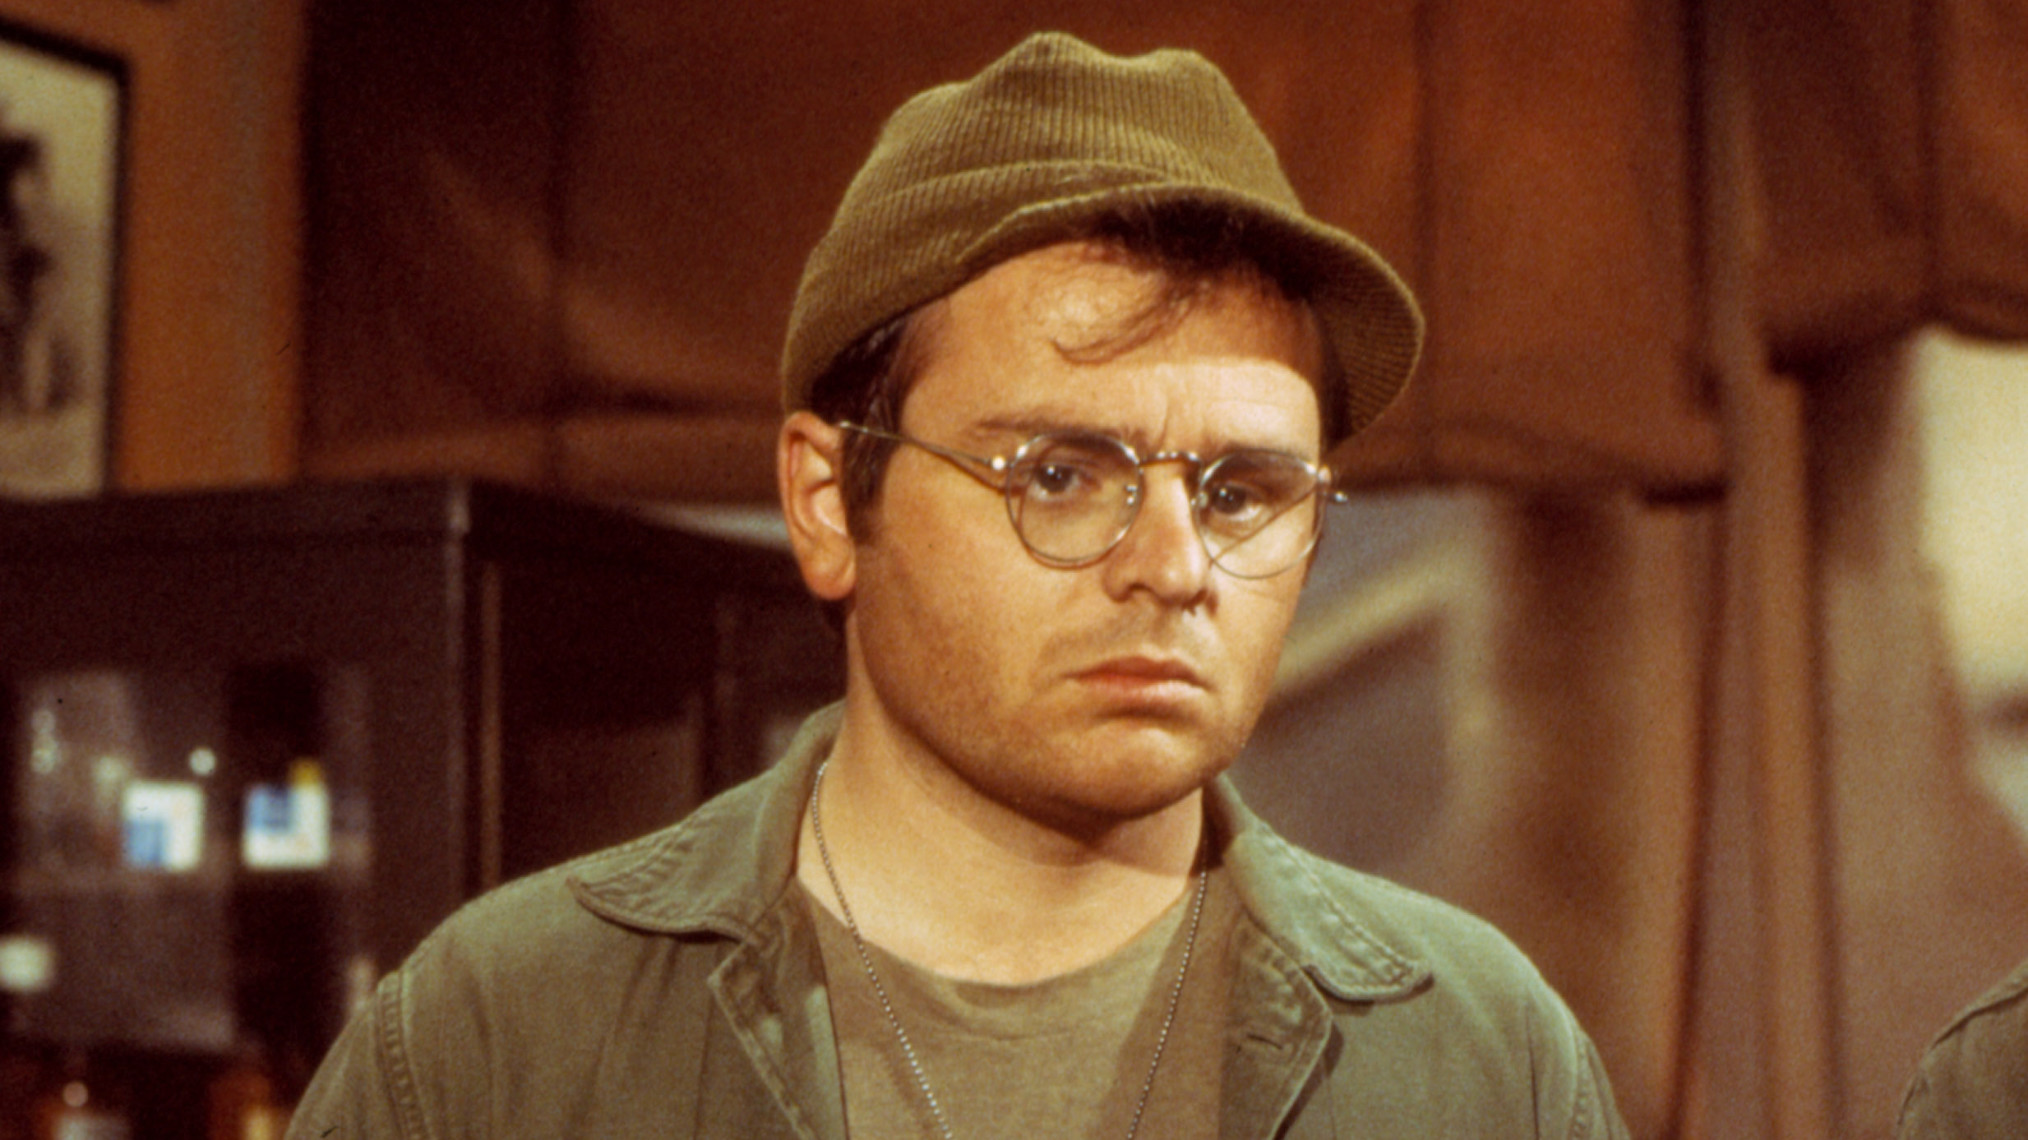 ‘M*A*S*H’ Alum Gary Burghoff Explains Why He Had to Reshoot His Last Scene